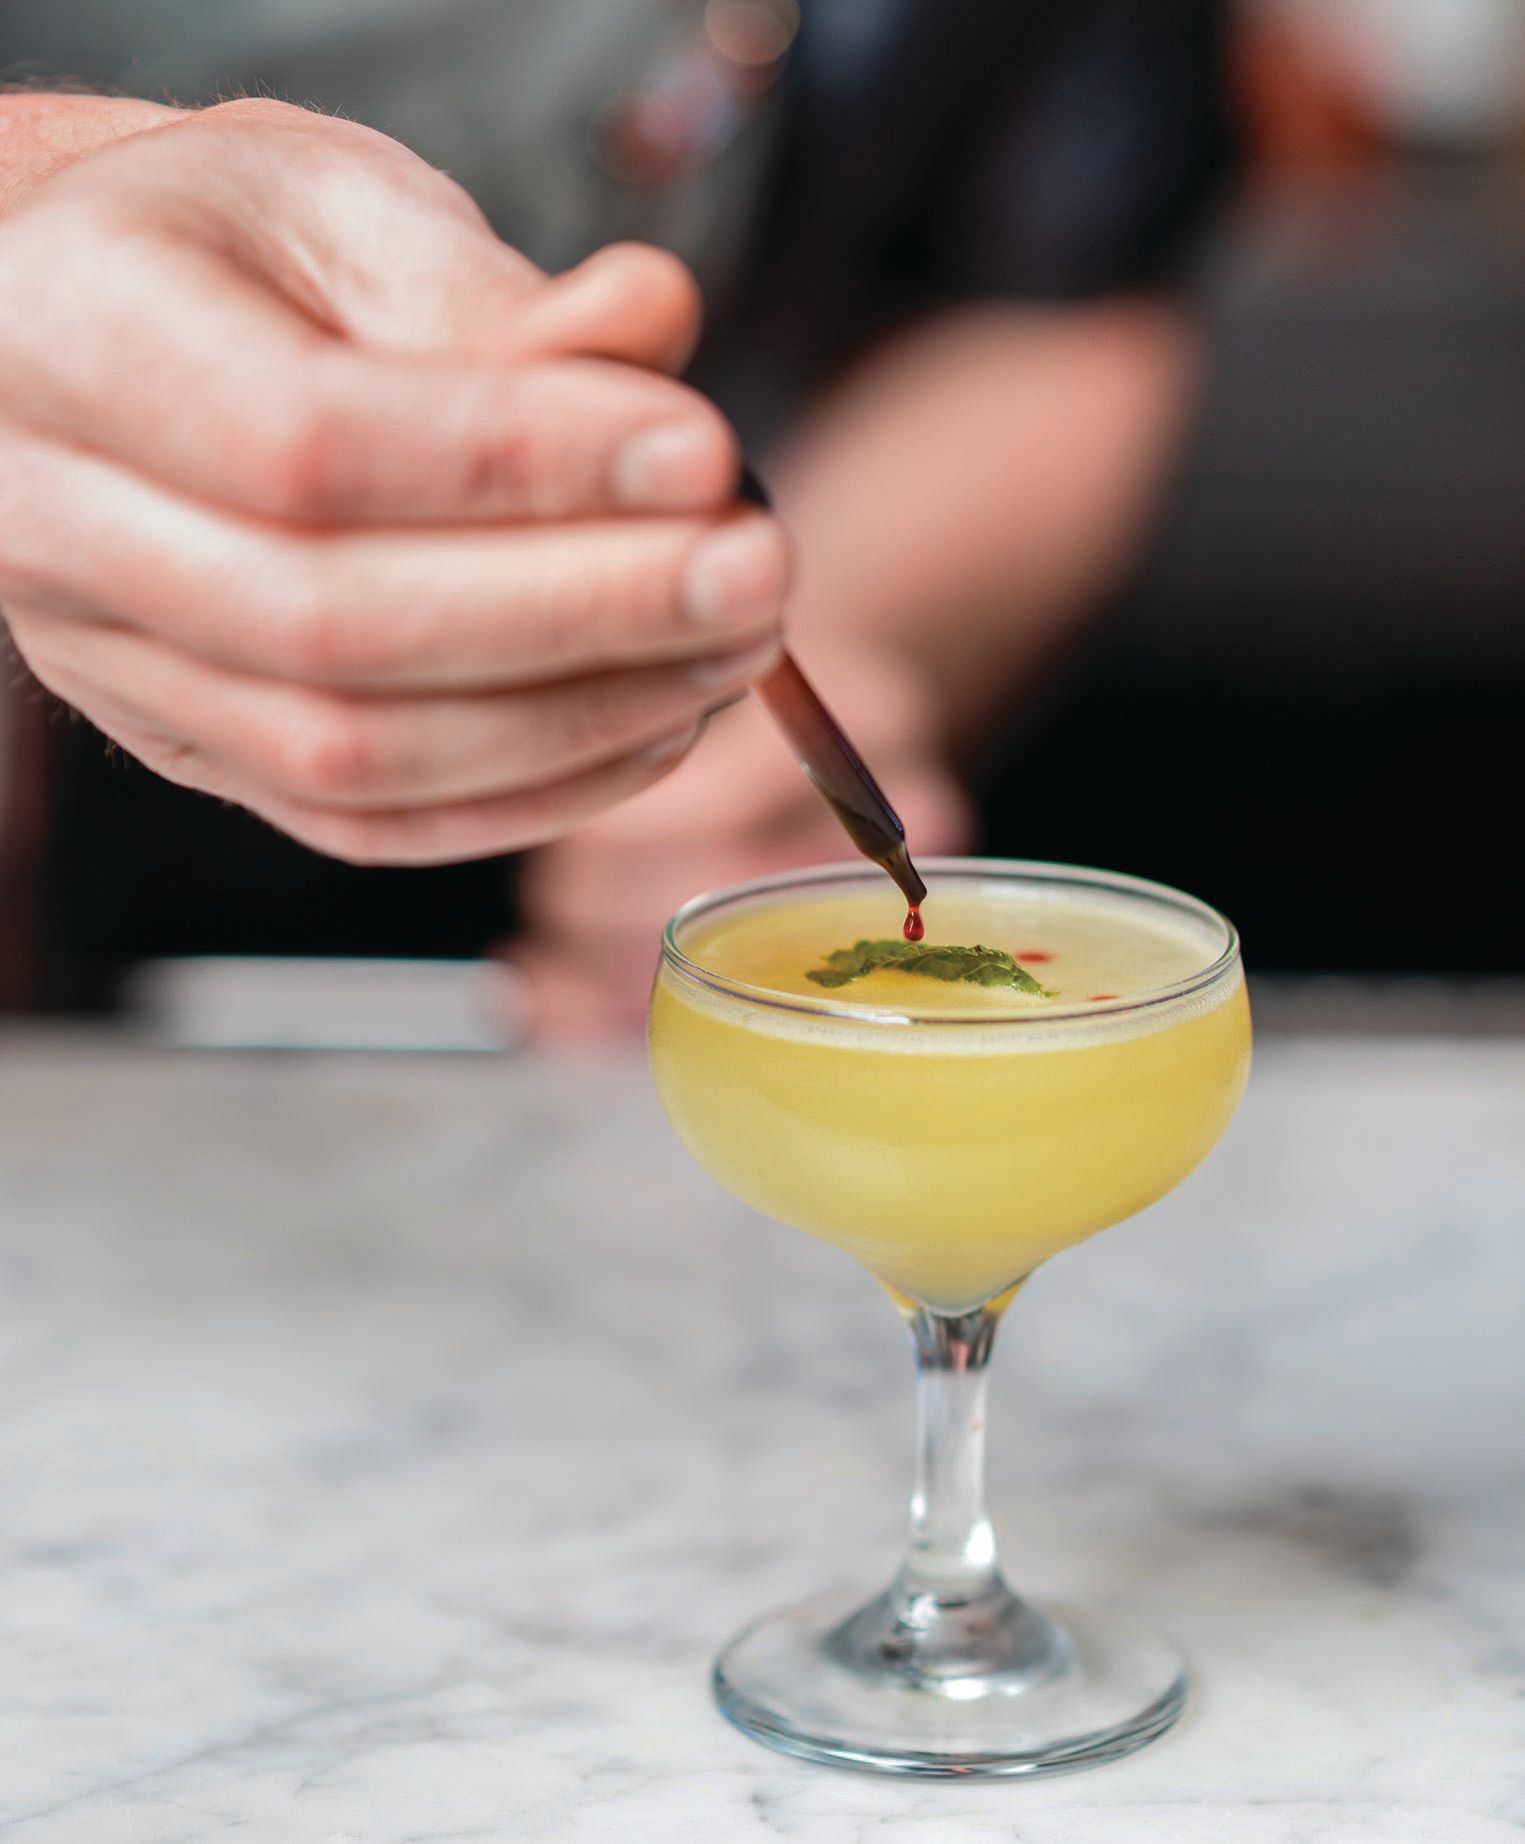 The Juliet & Romeo is one of the bar’s bestselling libations. PHOTO BY CASSANDRA STADNICKI